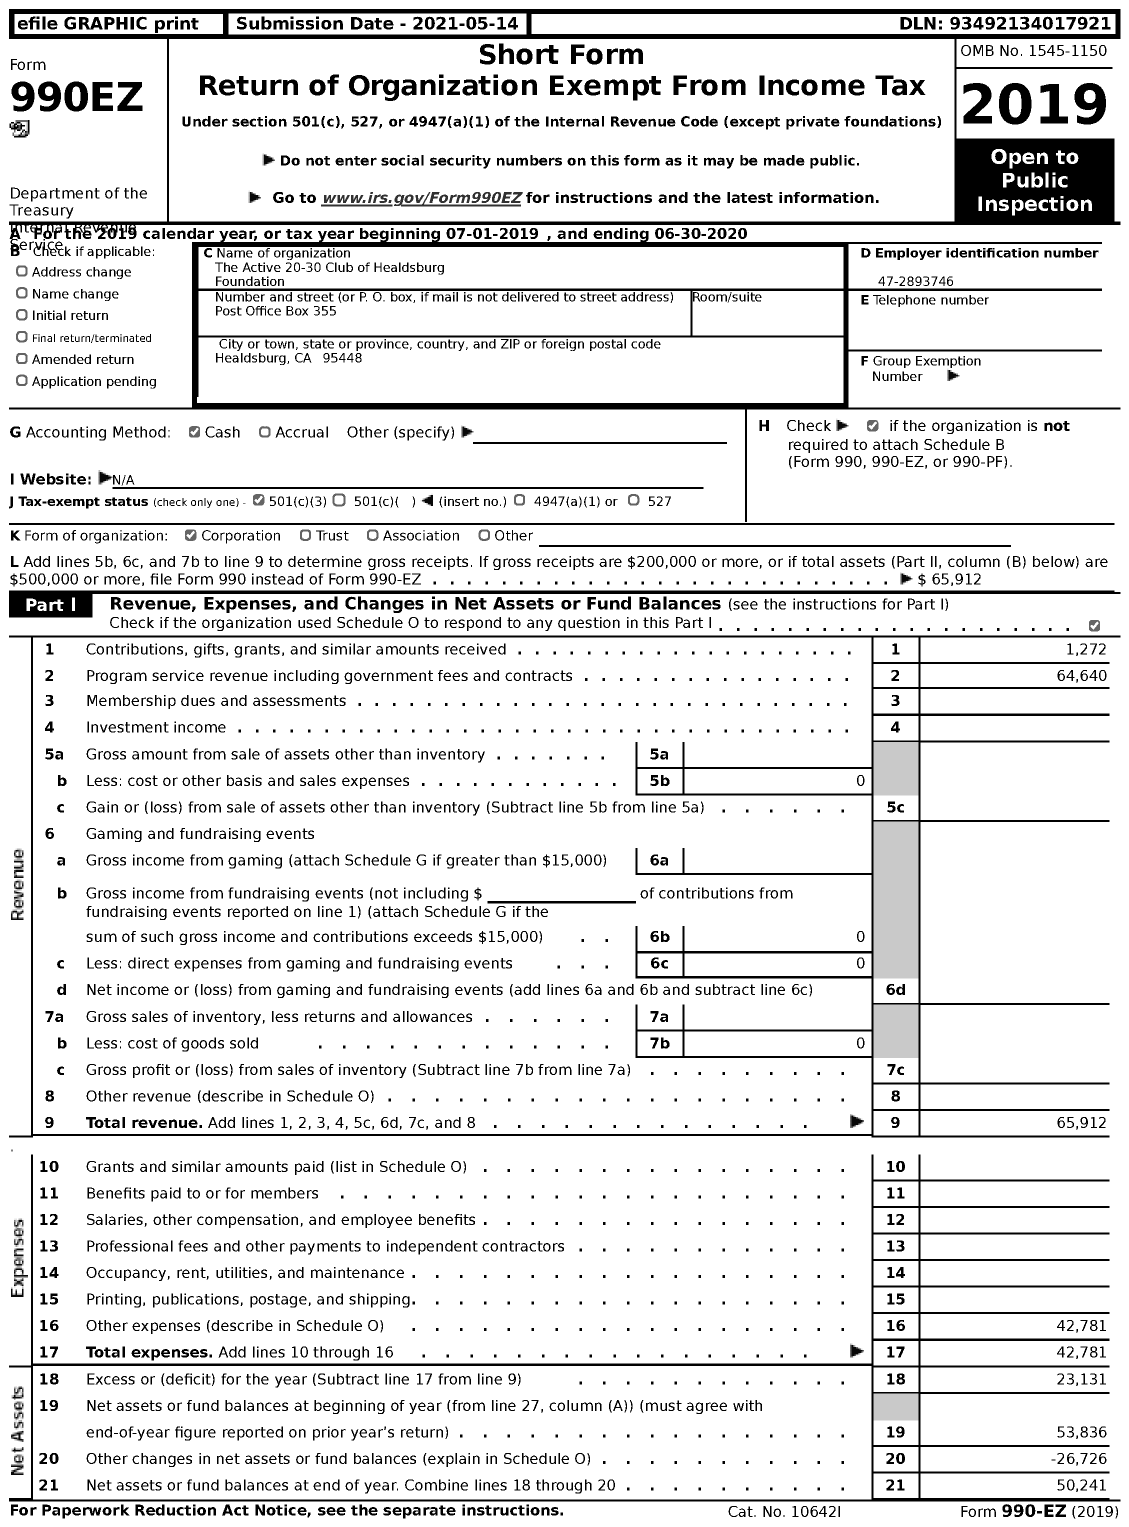 Image of first page of 2019 Form 990EZ for Active 20-30 Club of Healdssburg 205 Foundation